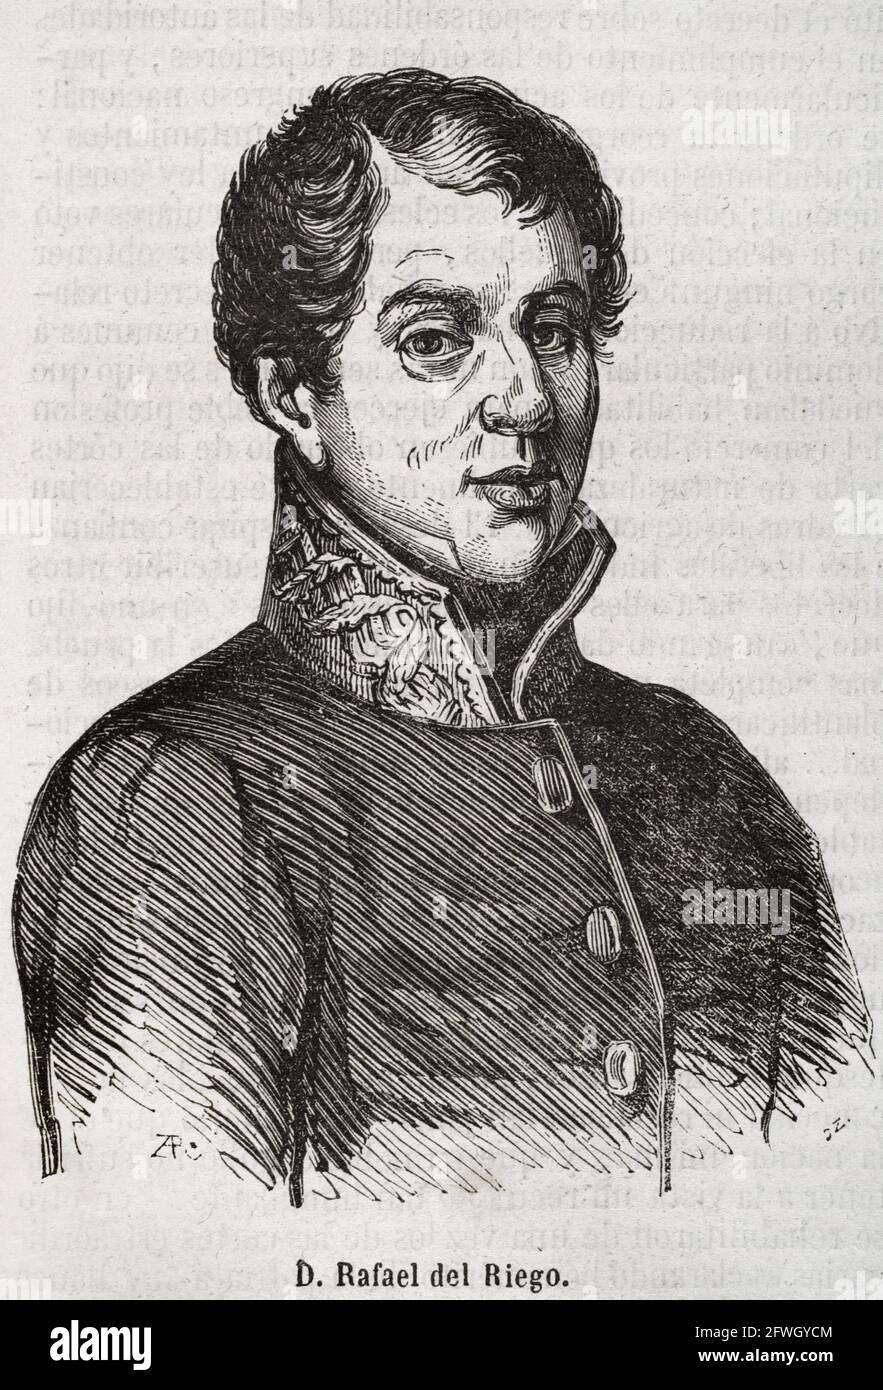 Rafael del Riego (1784-1823). Spanish general and liberal politician, who played a key role in the outbreak of the Liberal Triennium. Portrait. Engraving. Historia General de España by Father Mariana, 1853. Stock Photo